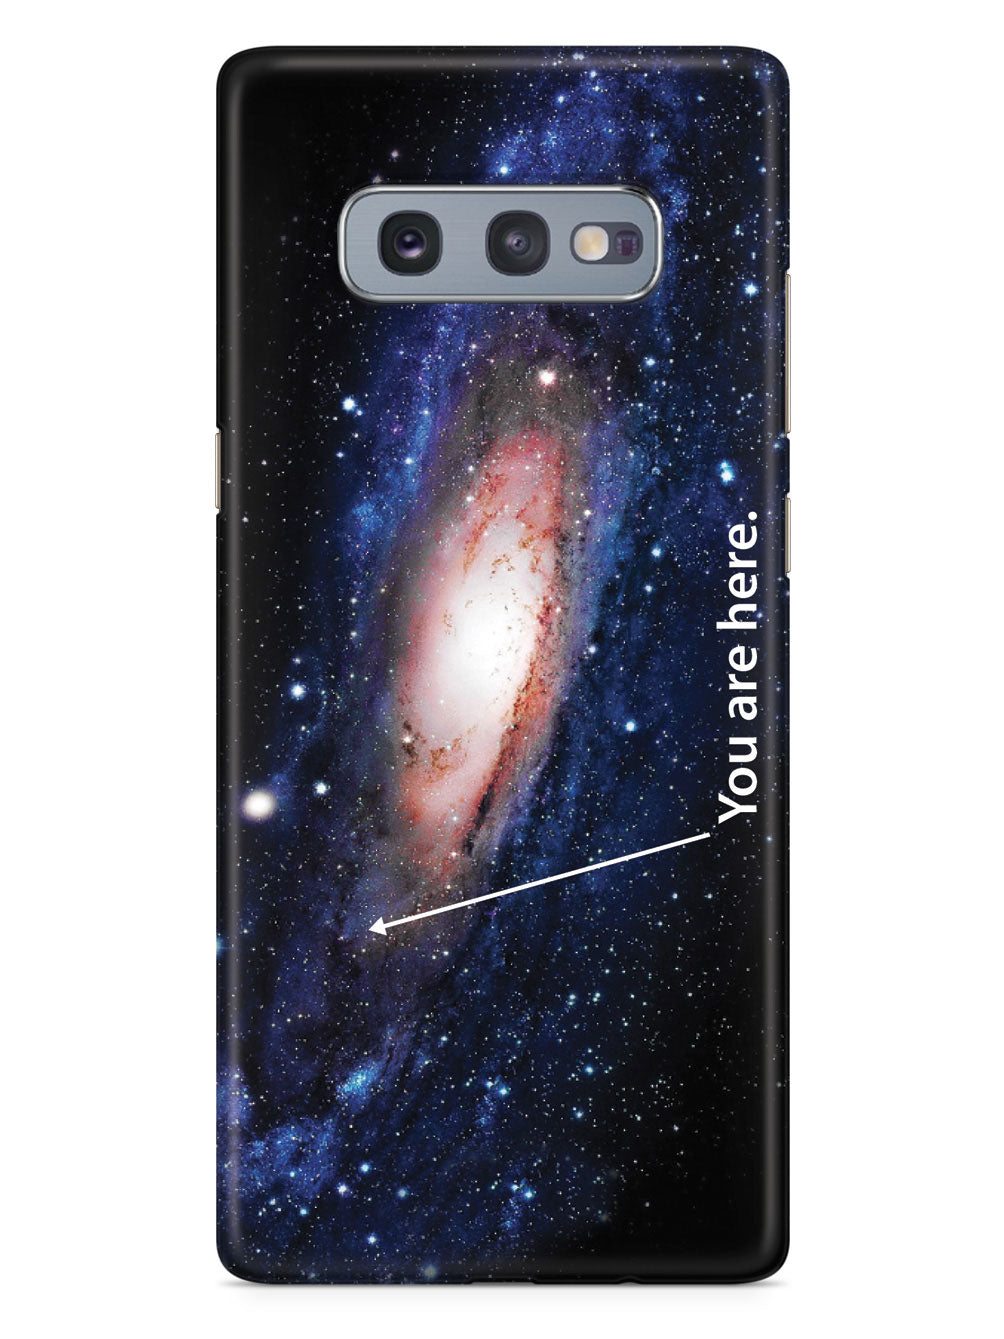 Milky Way Outer Space - You Are Here  Case